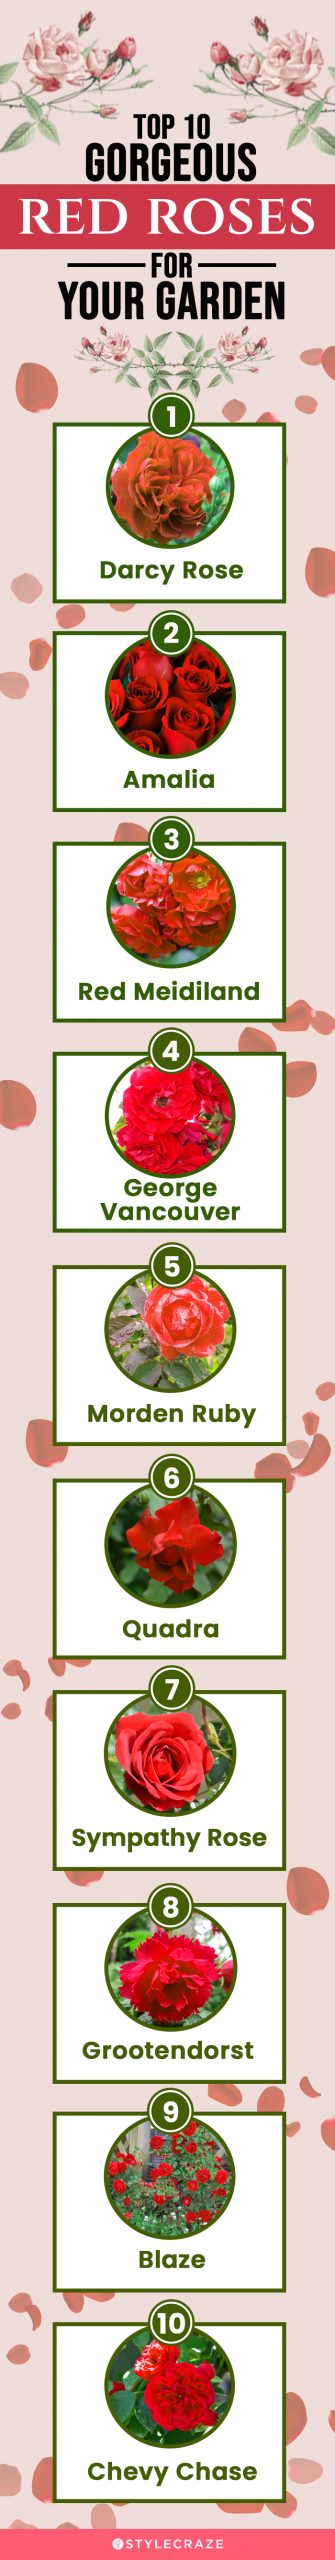 top 10 gorgeous red roses for your garden [infographic]